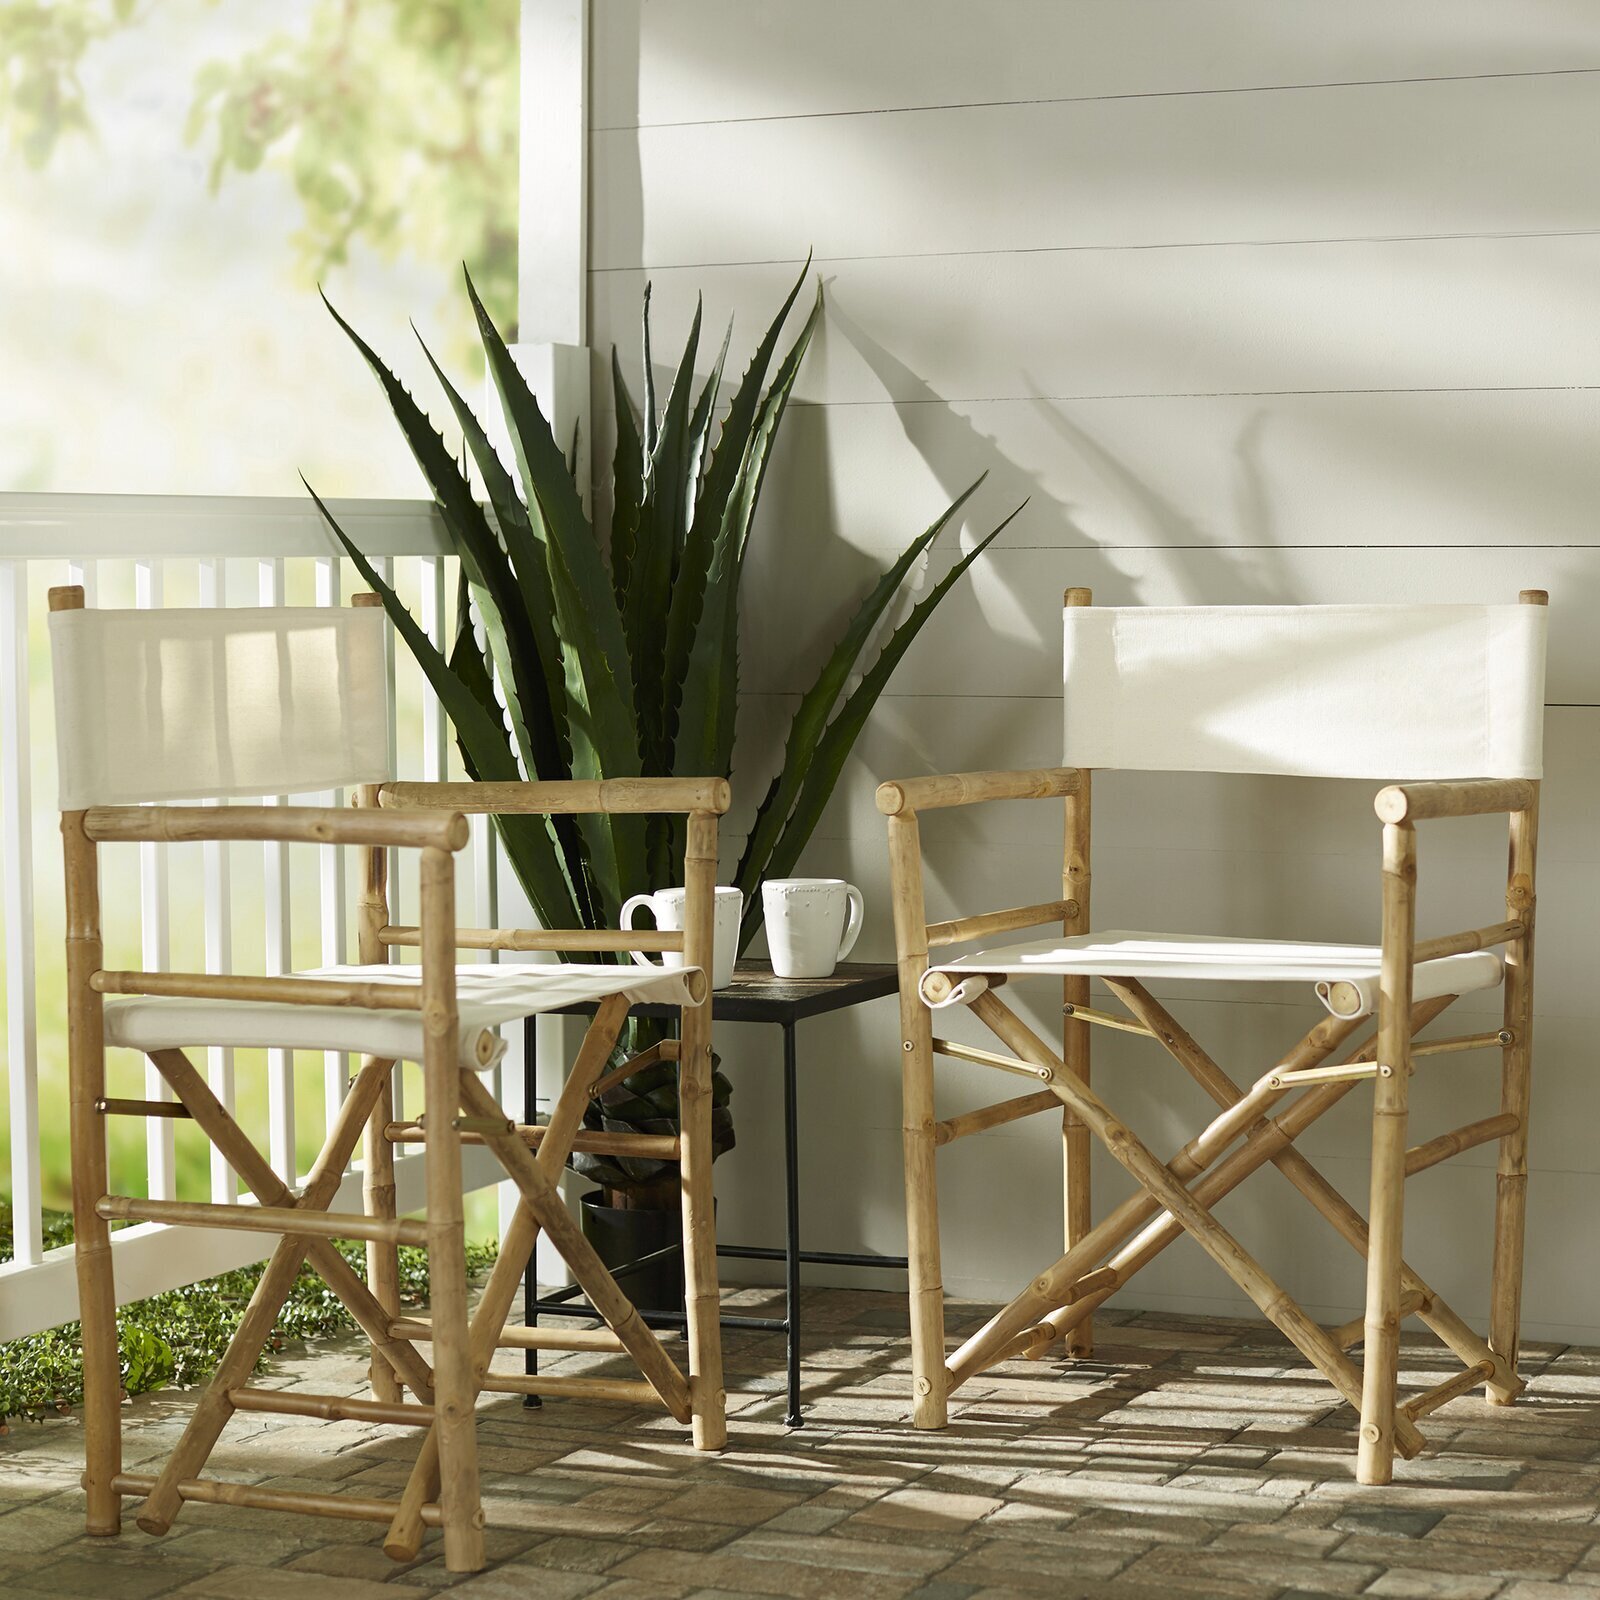 Bamboo director style chairs 